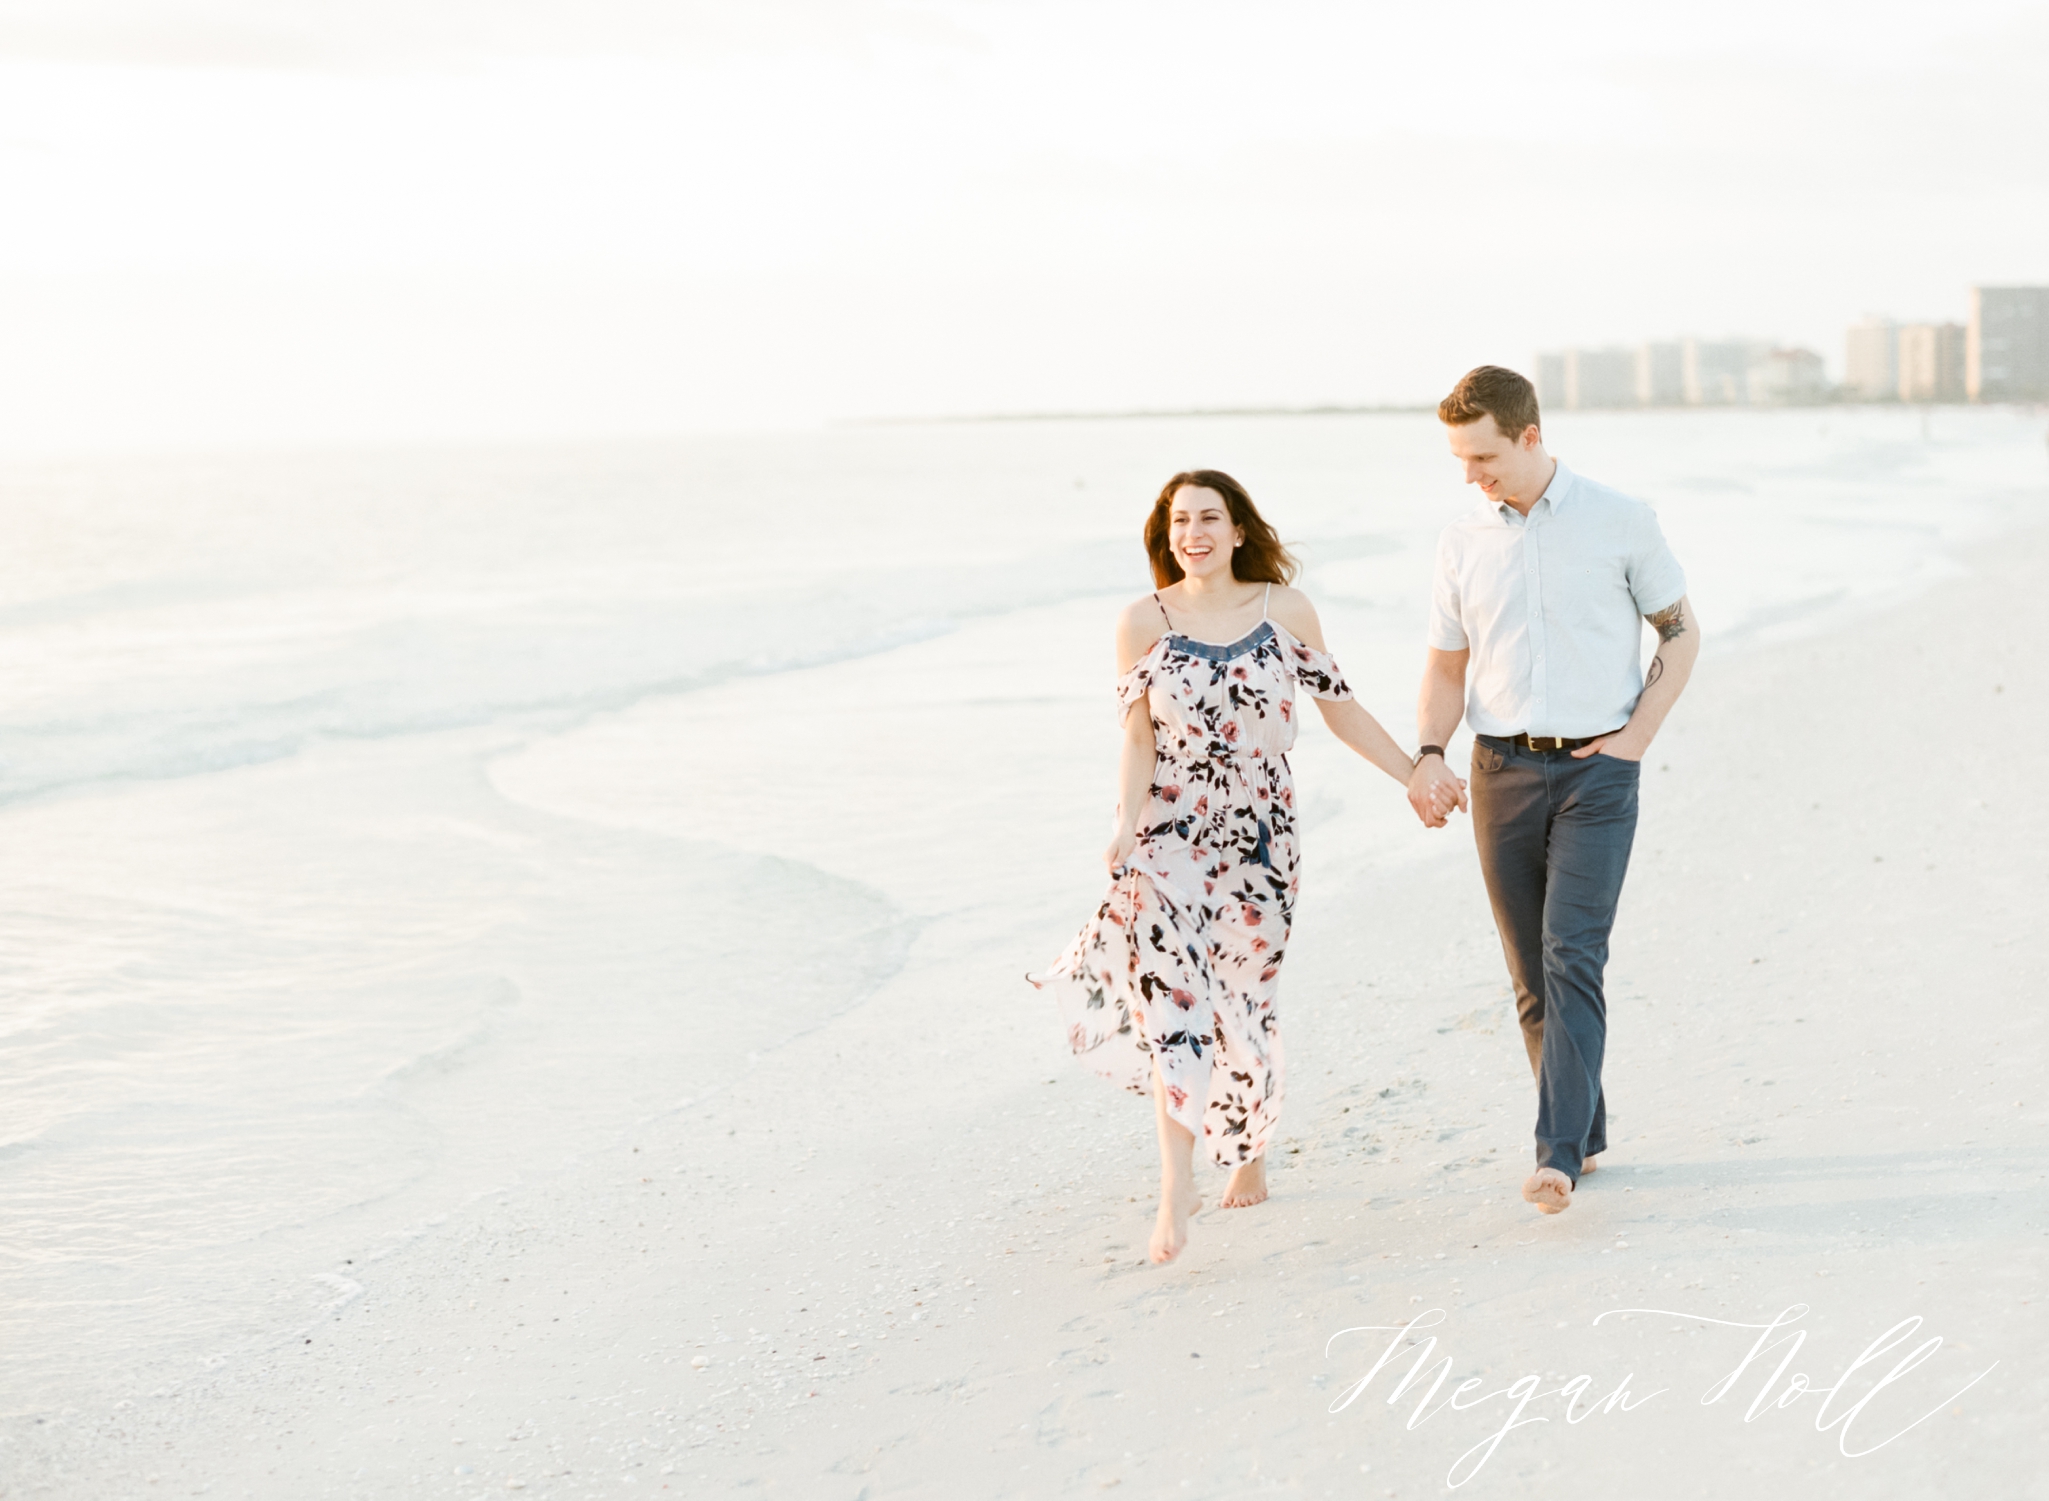 Walking on the beach at sunset, bride and groom posing for engagement pictures